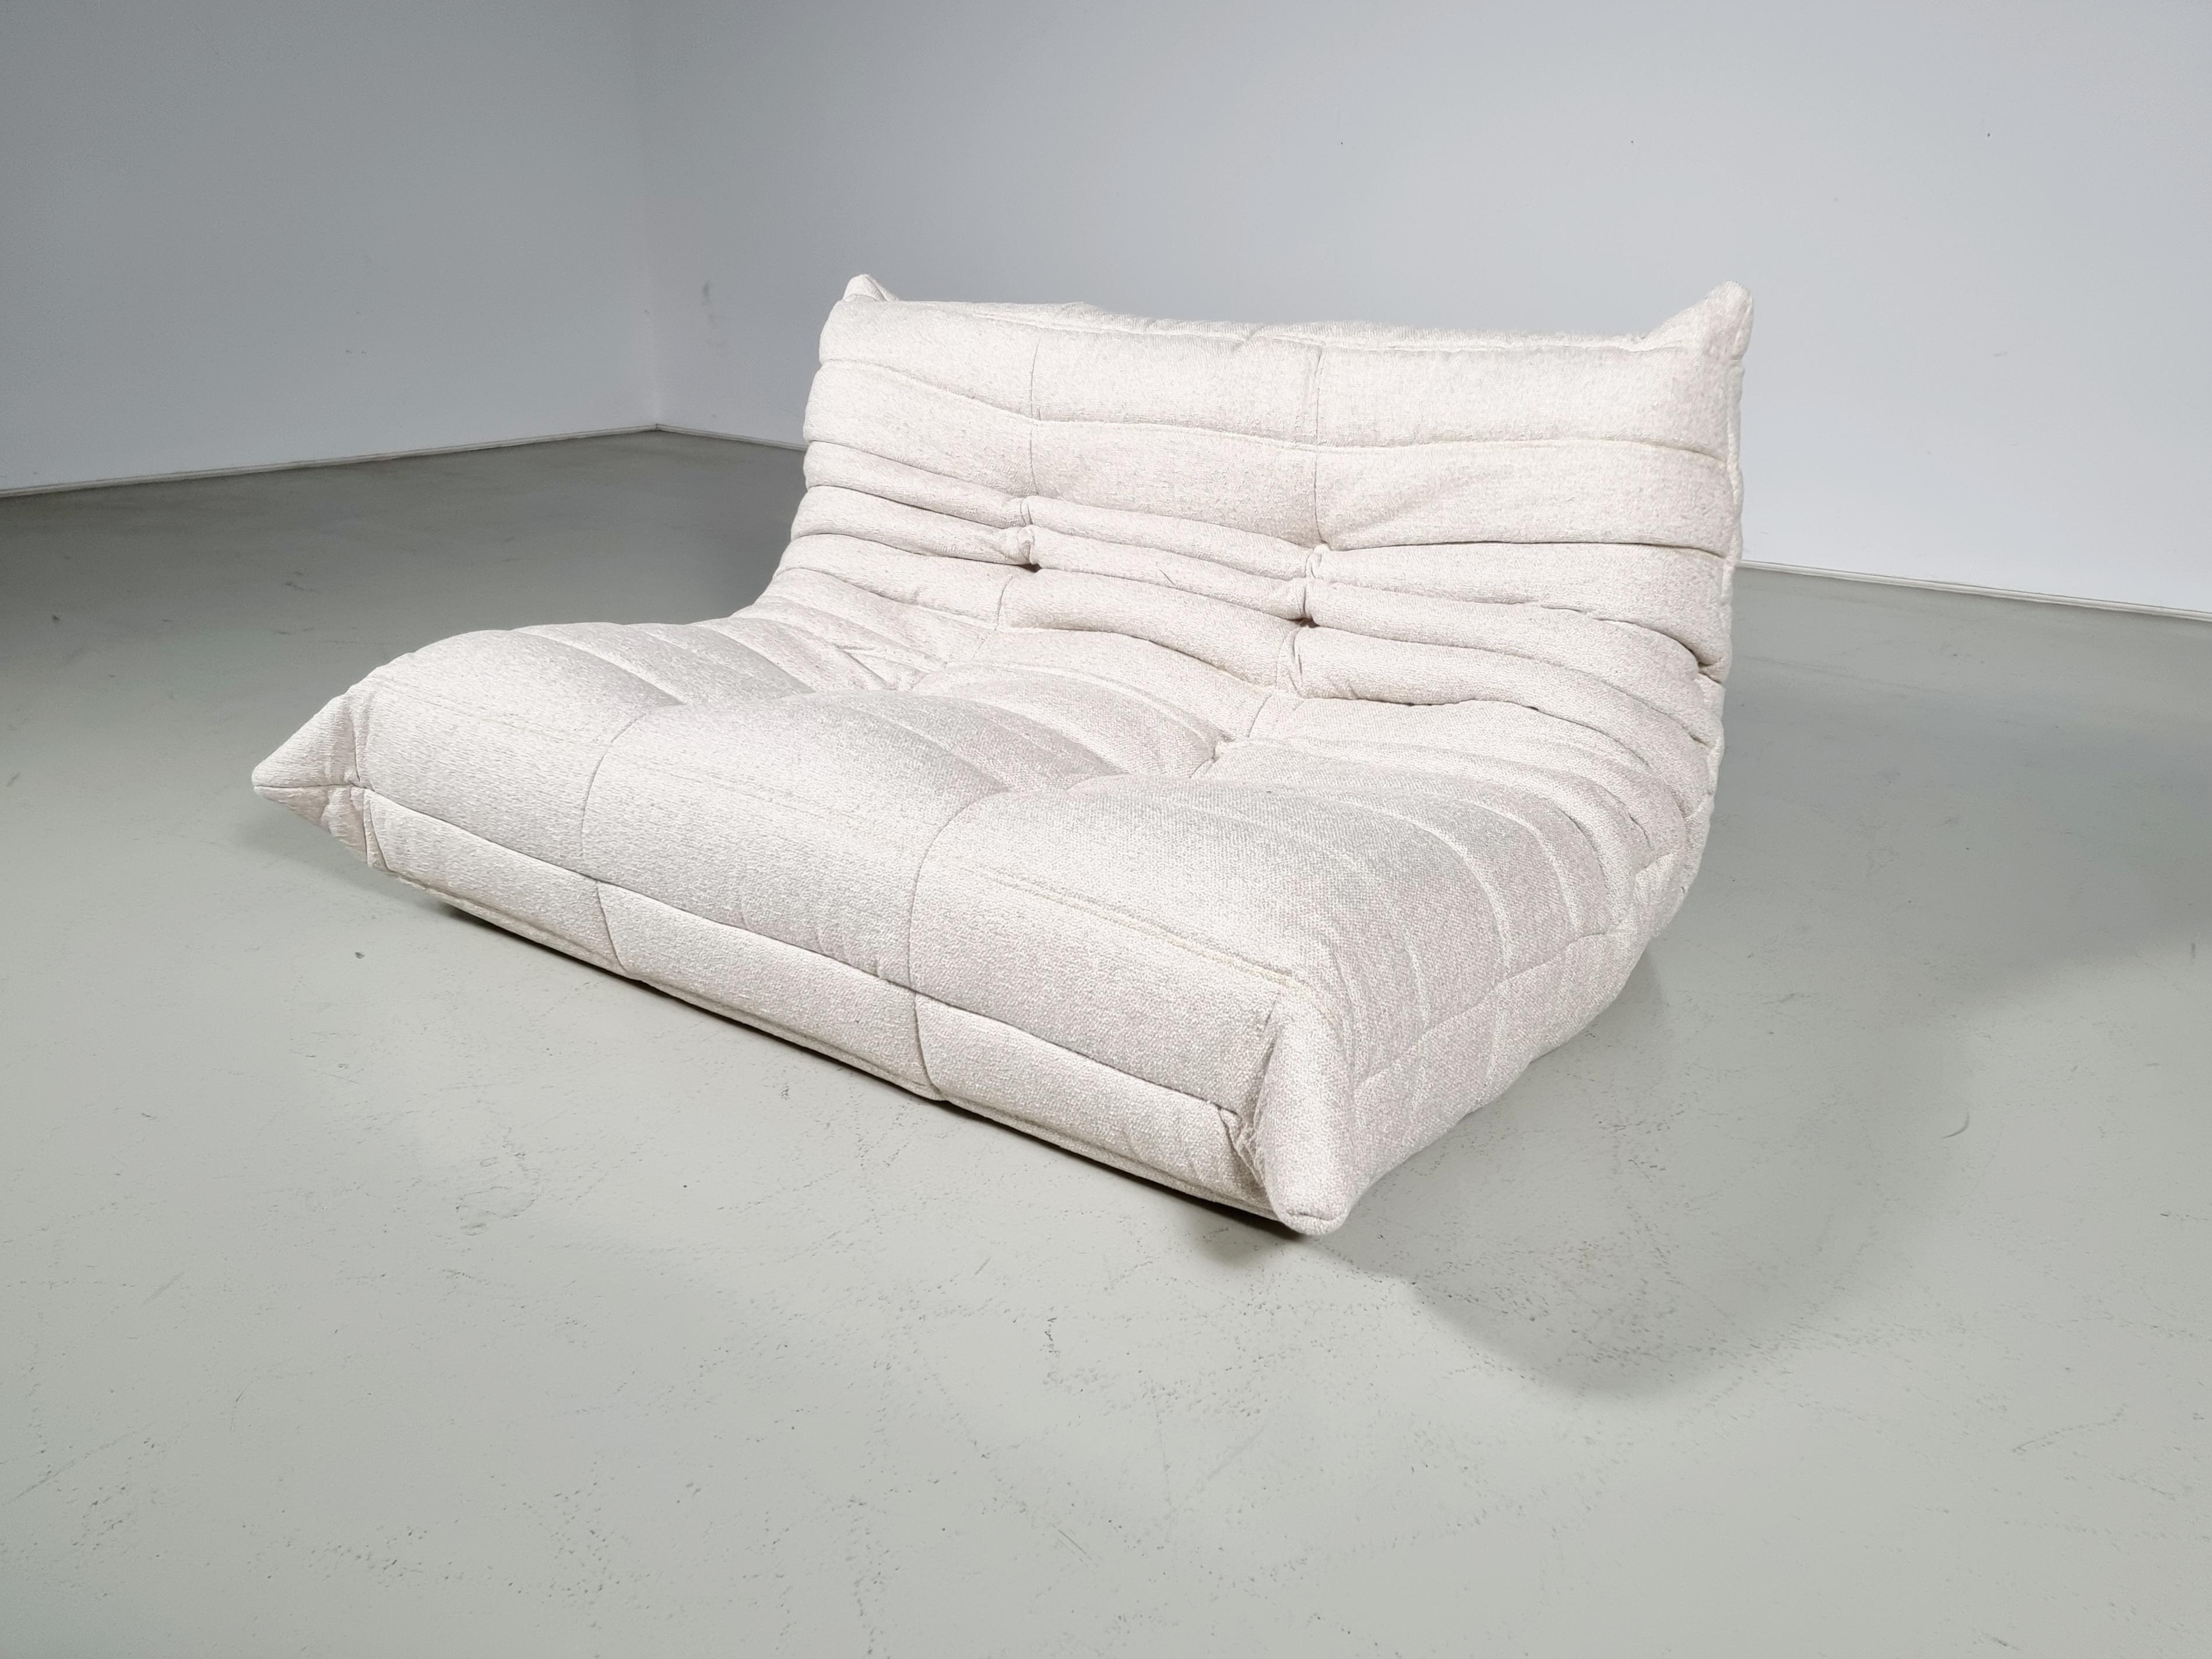 Togo sofa designed by Michel Ducaroy in the 1970s for Ligne Roset.
It shows a nice warm natural color tone and its famous wrinkled cozy design.
Lined underneath with original fabric. Reupholstered in a high-quality textured fabric by Zinc textiles.